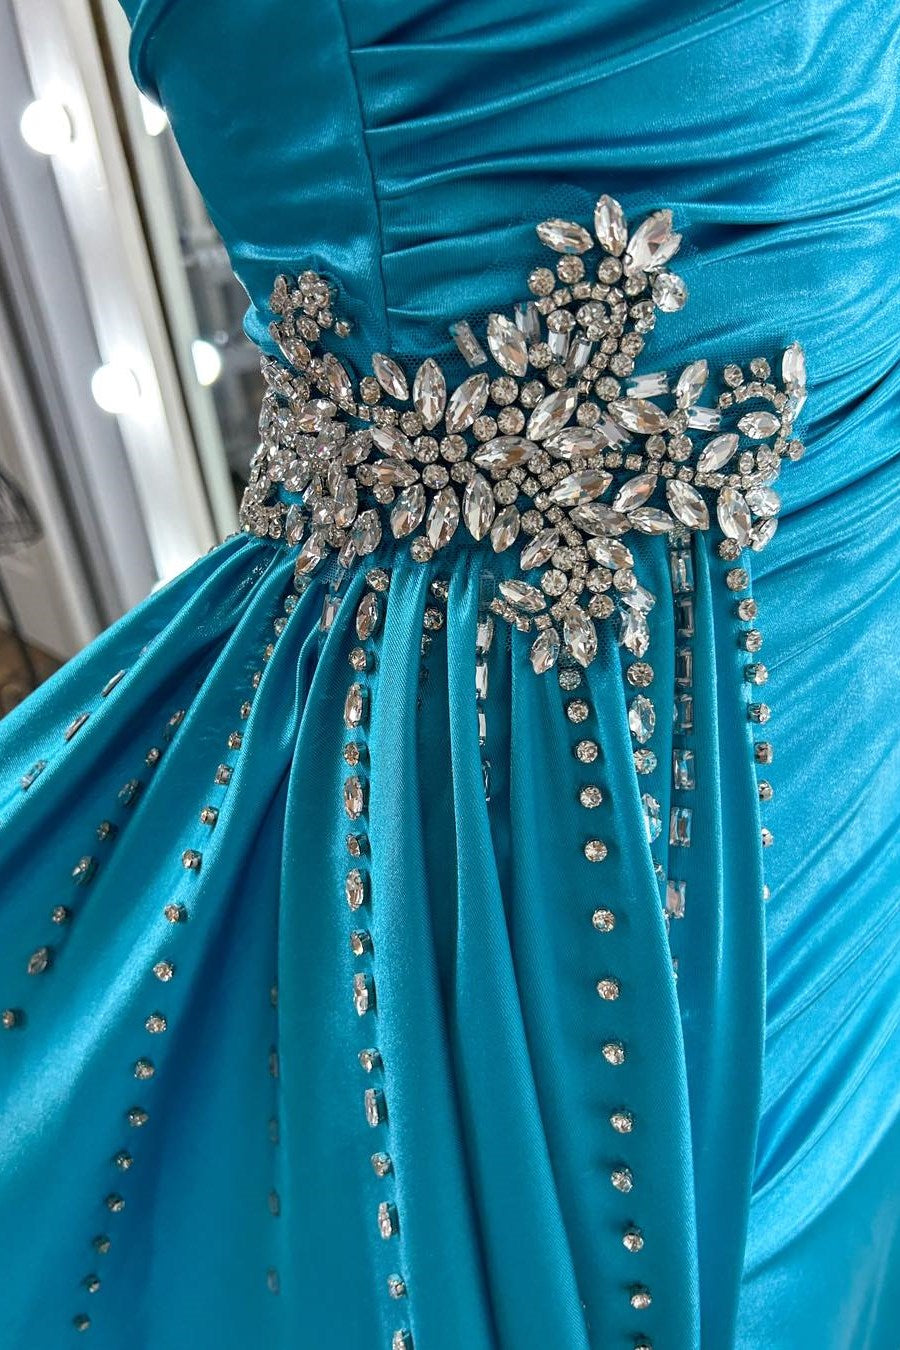 Teal Blue Beaded Spaghetti Strap Long Gown with Attached Train